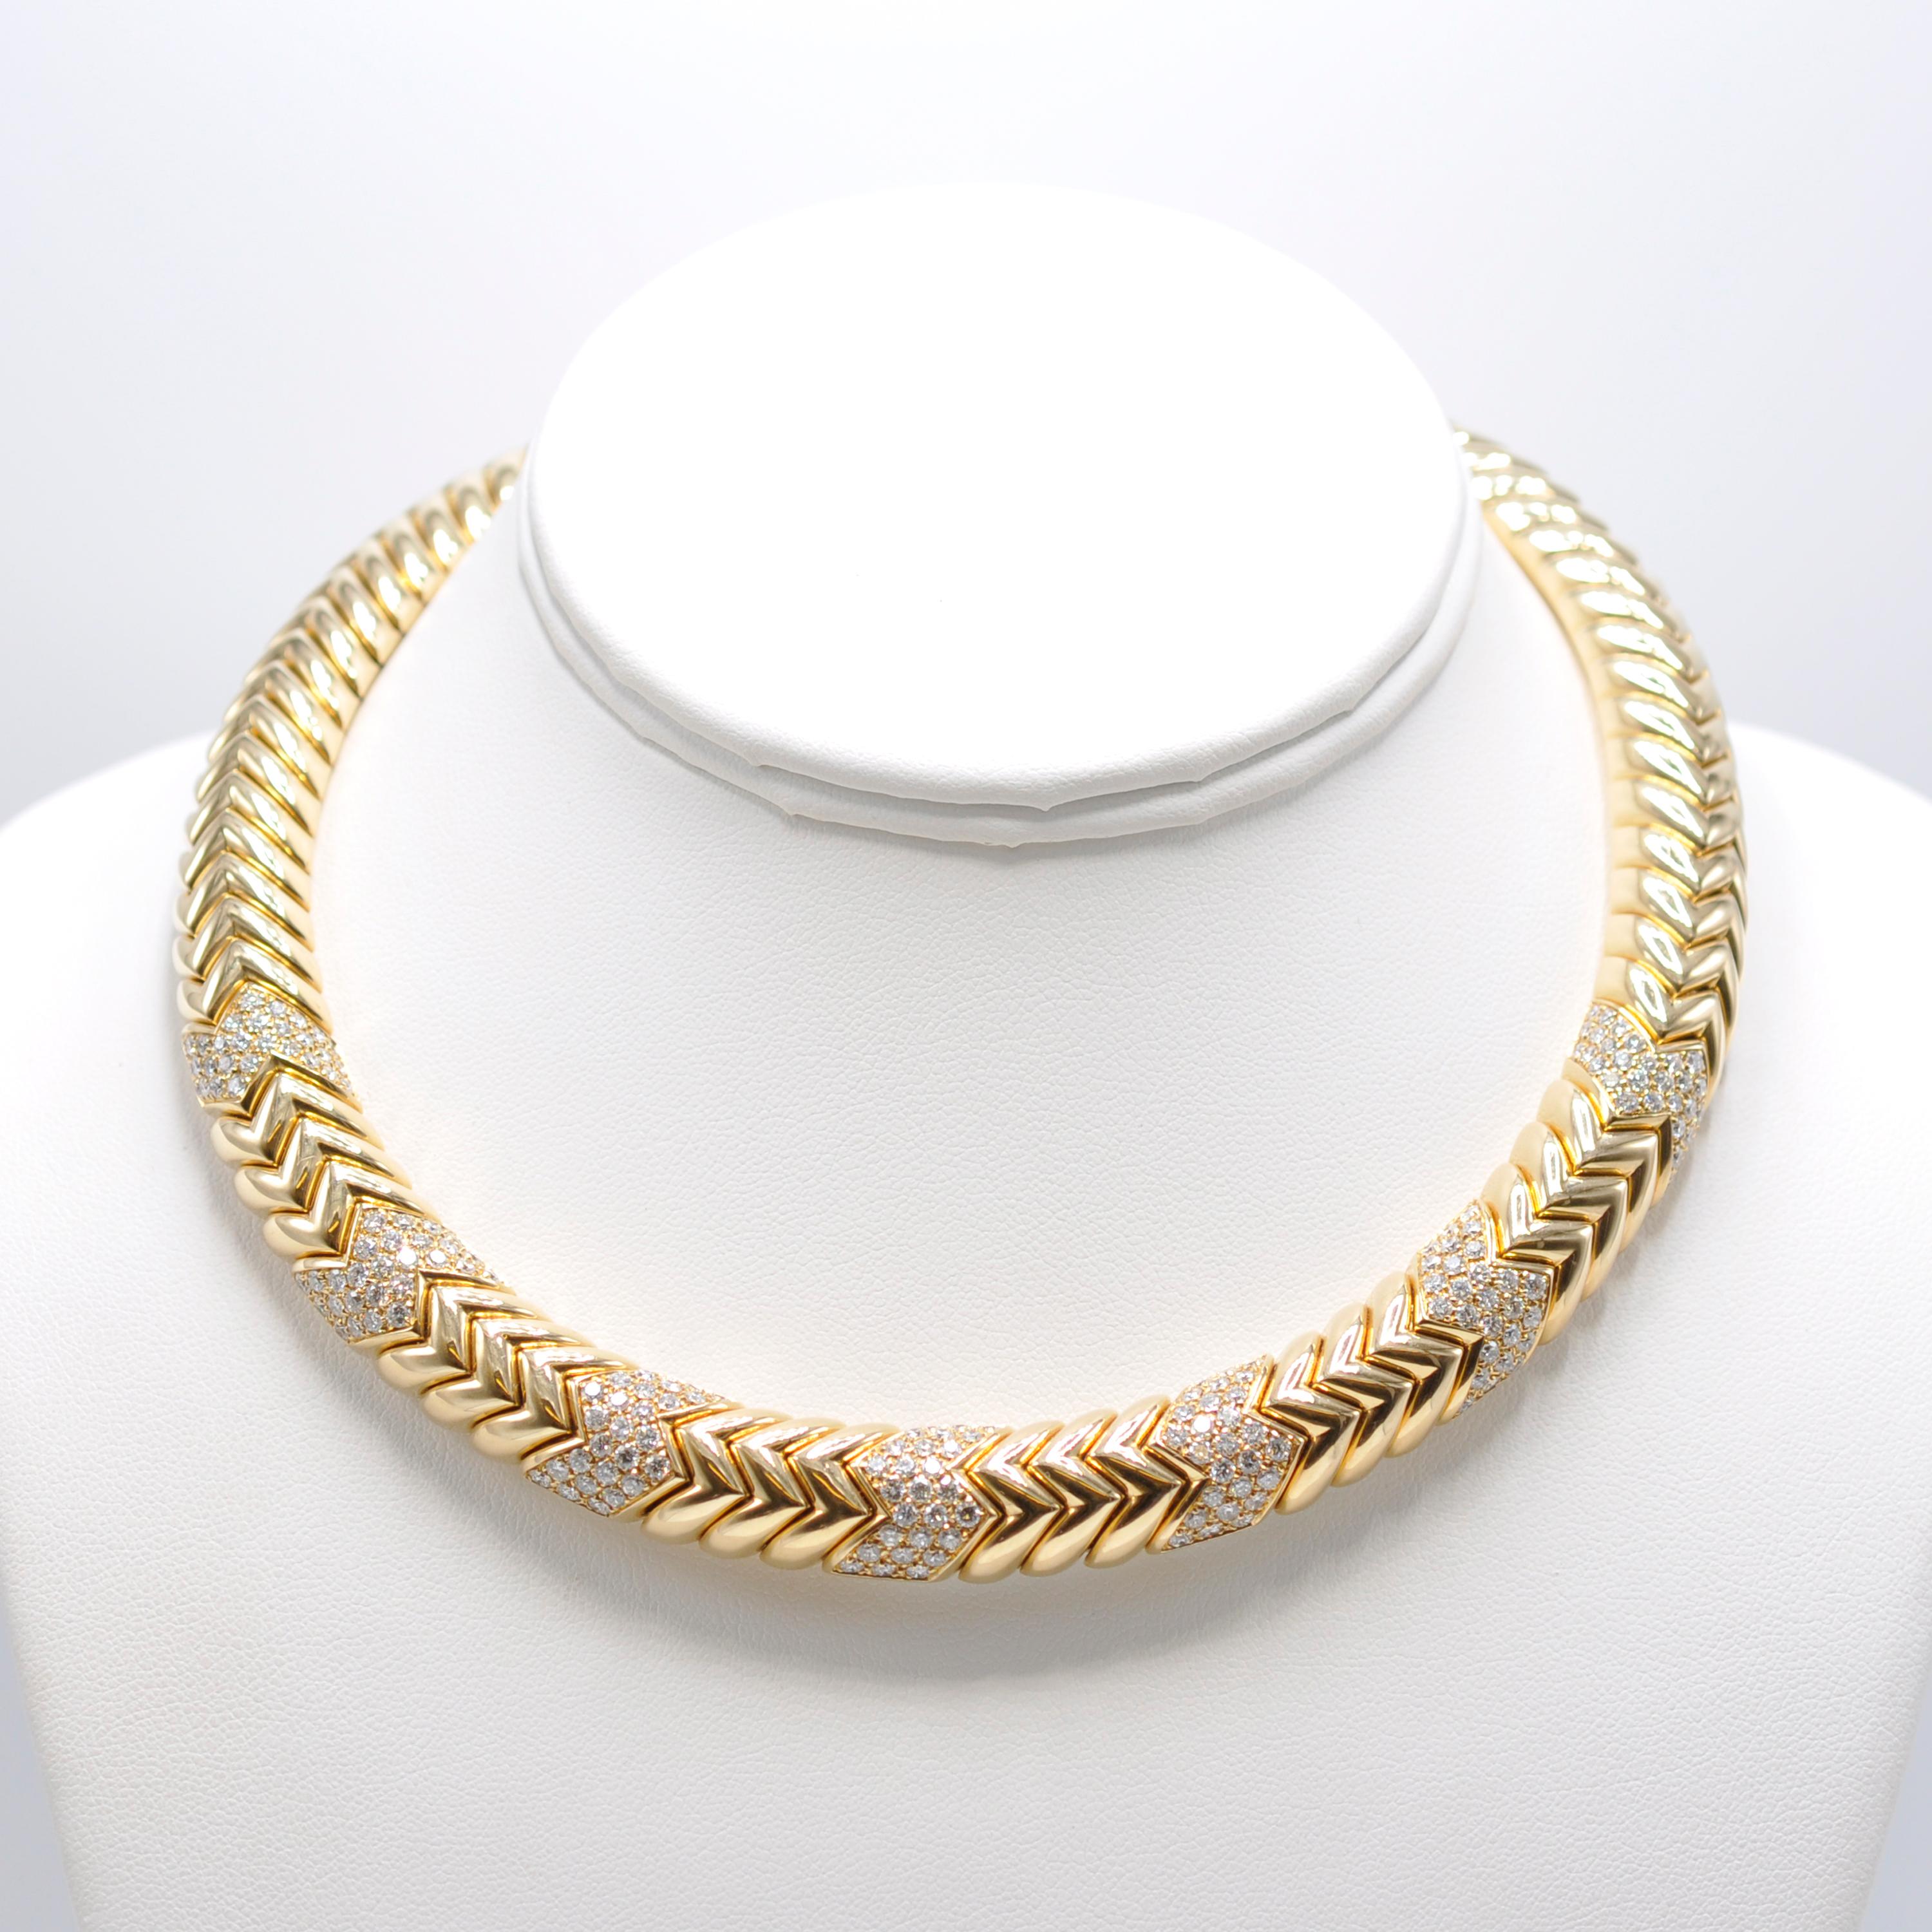 Impressive Italian 18 Karat yellow gold Diamond Bulgari Spiga Collar Necklace is sure to make a statement where ever you go. 

The links of this necklace sit together in a chevron pattern which is mimicked by the 7 evenly spaced diamond stations